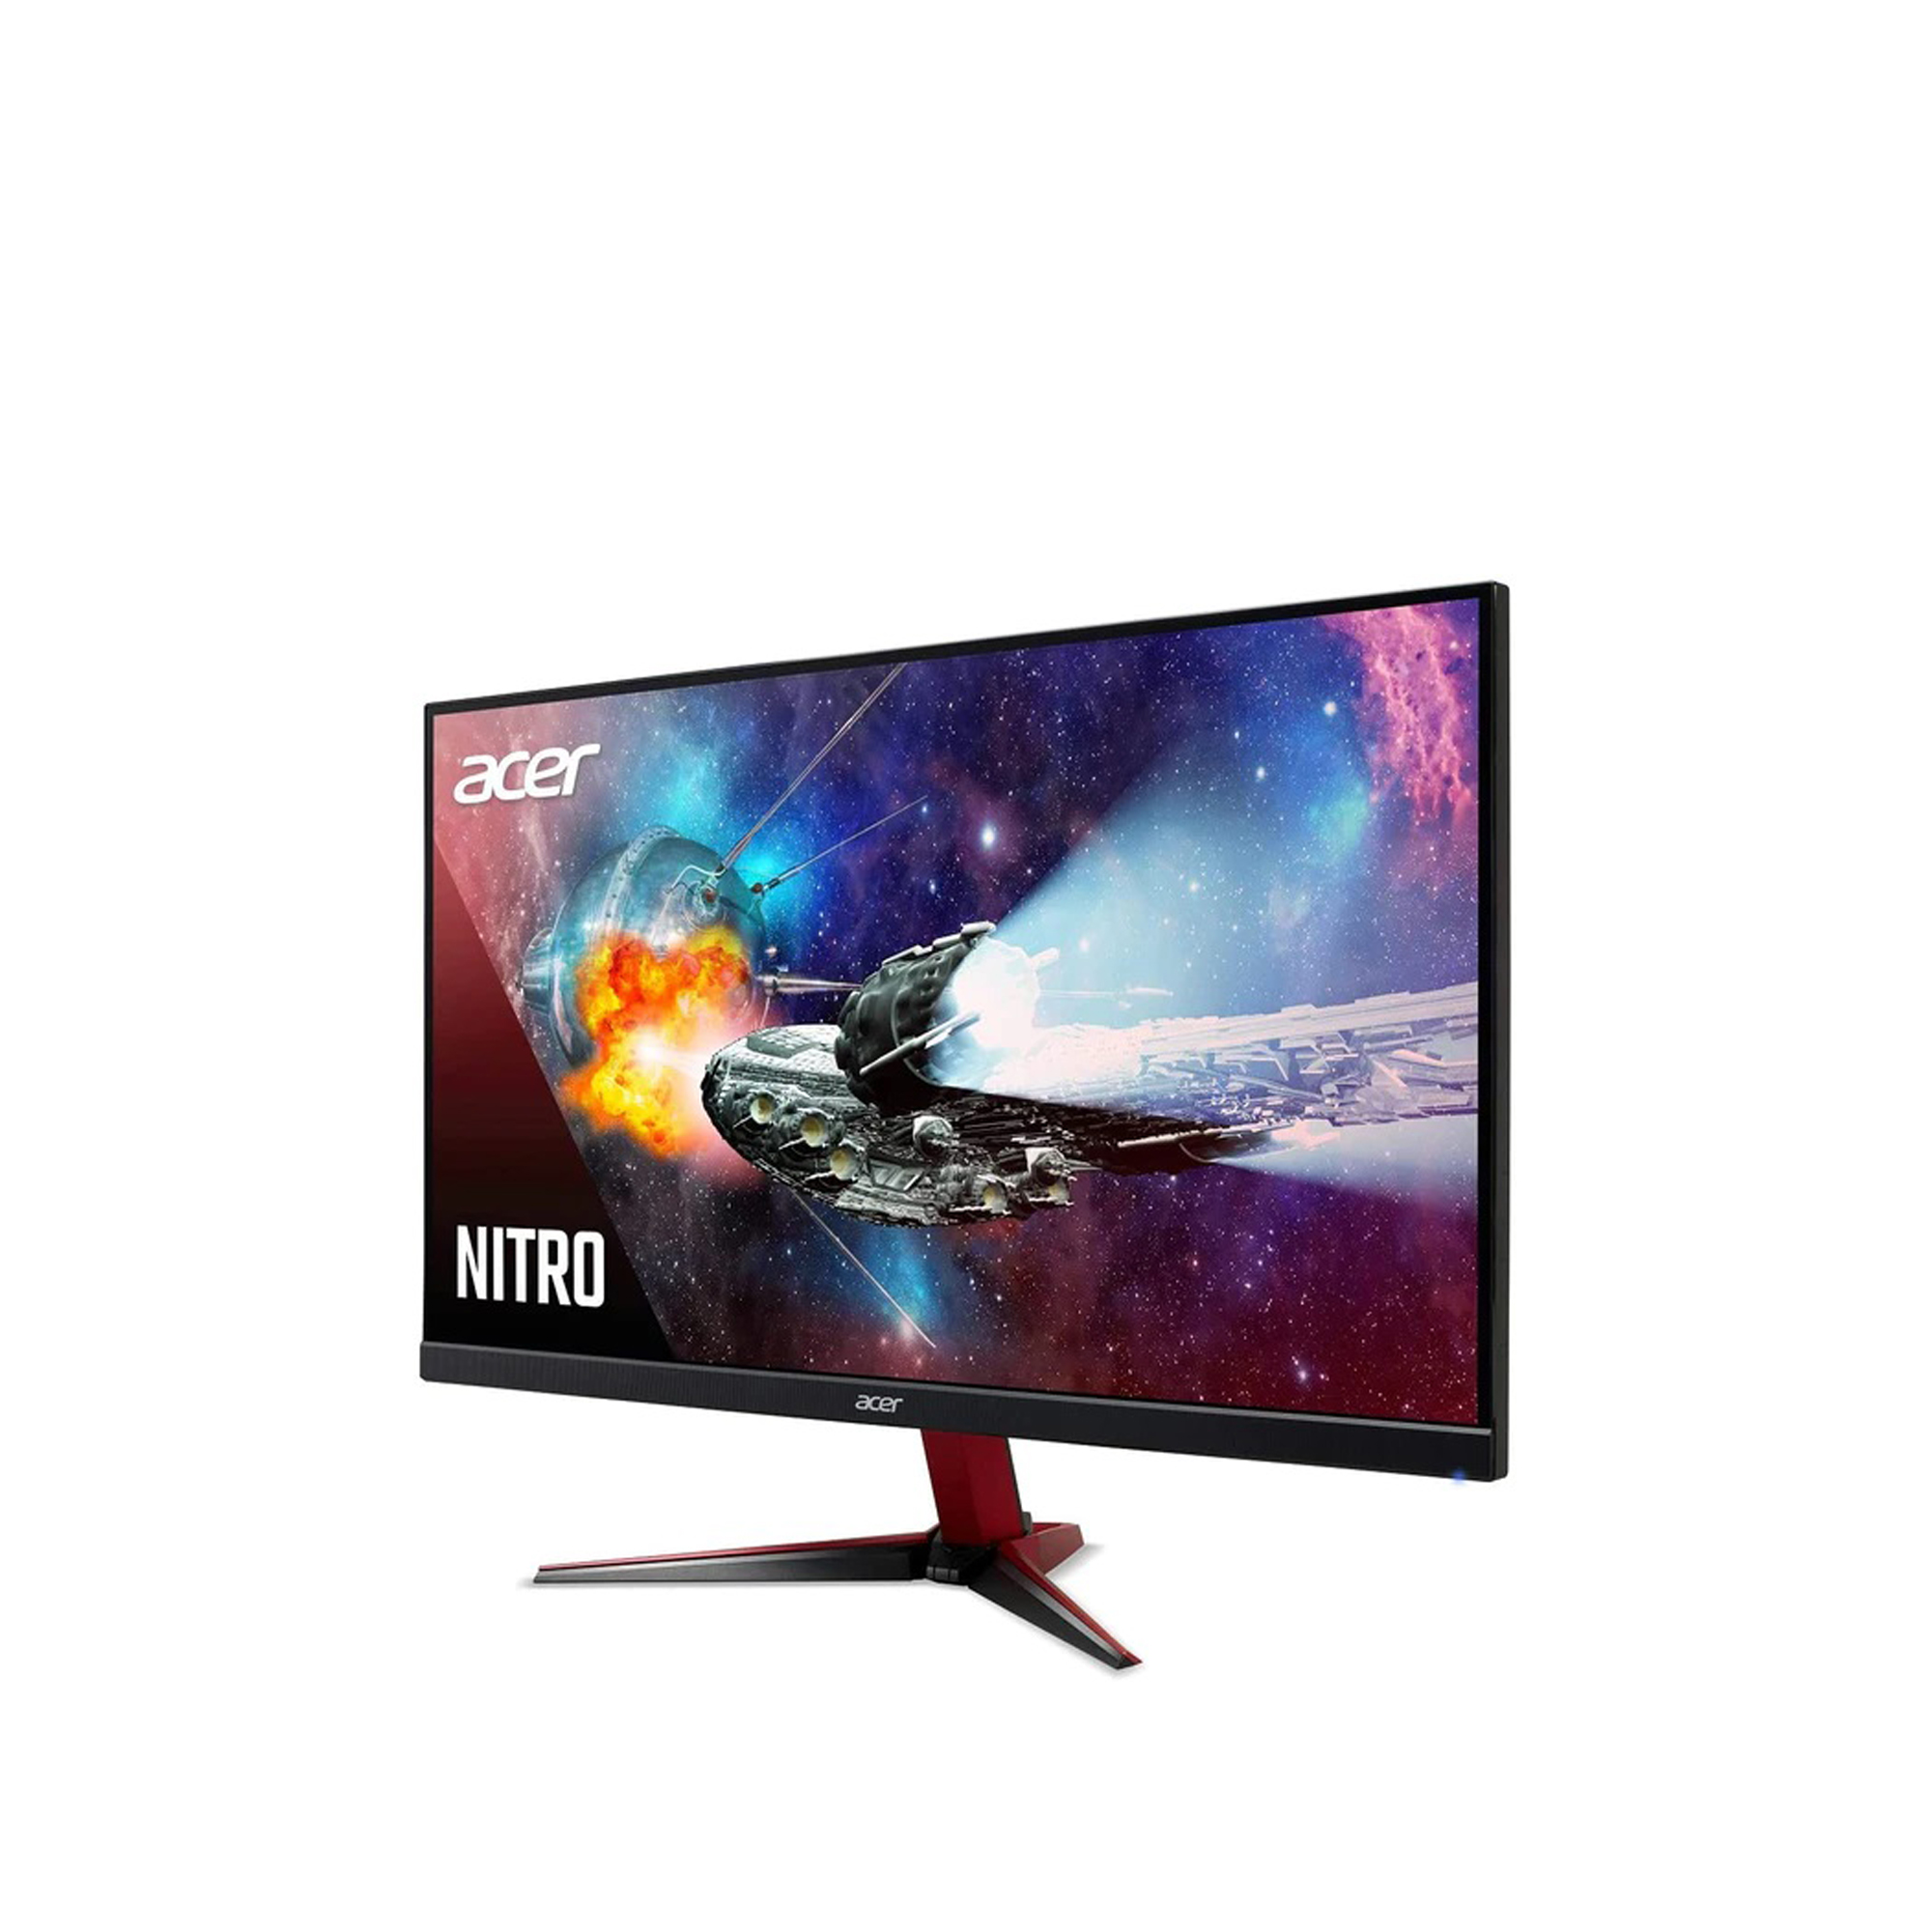 SALE] Acer Nitro VG271 S Gaming Monitor 27 Inches IPS 1920 x 1080 165Hz 400  Nits HDMI DPORT AMD Radeon FreeSync Black Accenthub